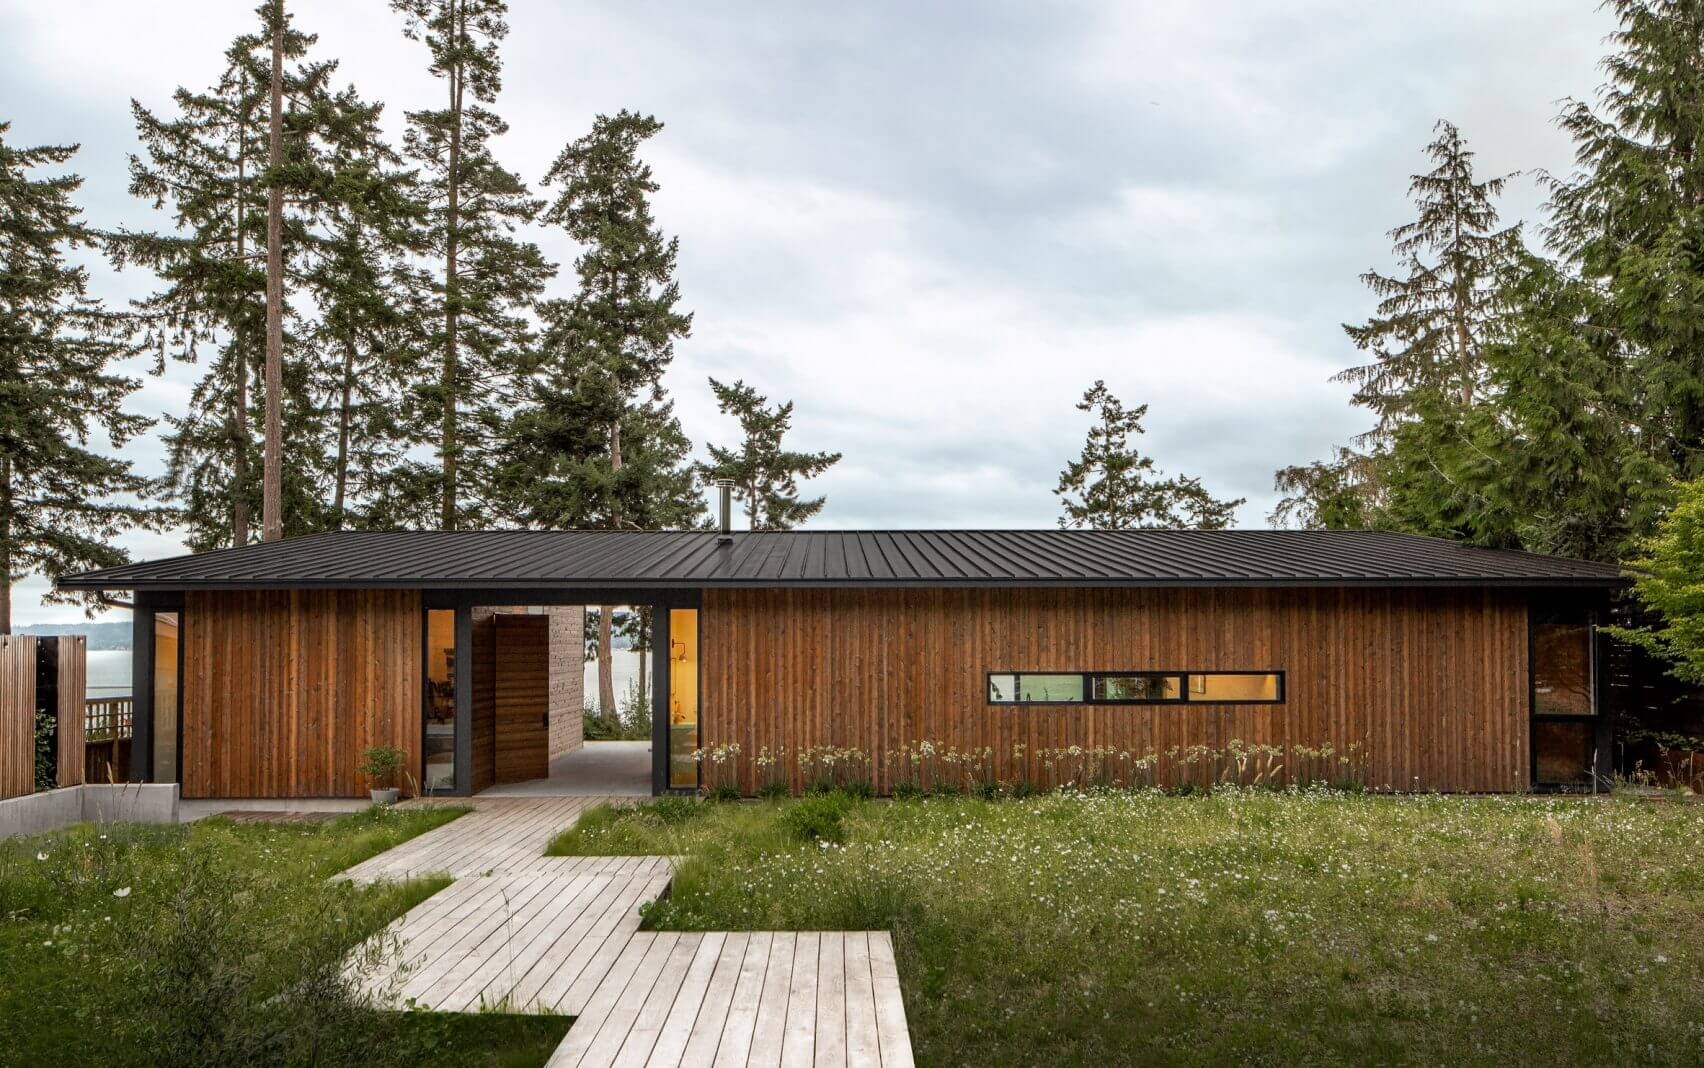 whidbey dogtrot house washington shed usa architecture dezeen 2364 col 15 1704x1068 1